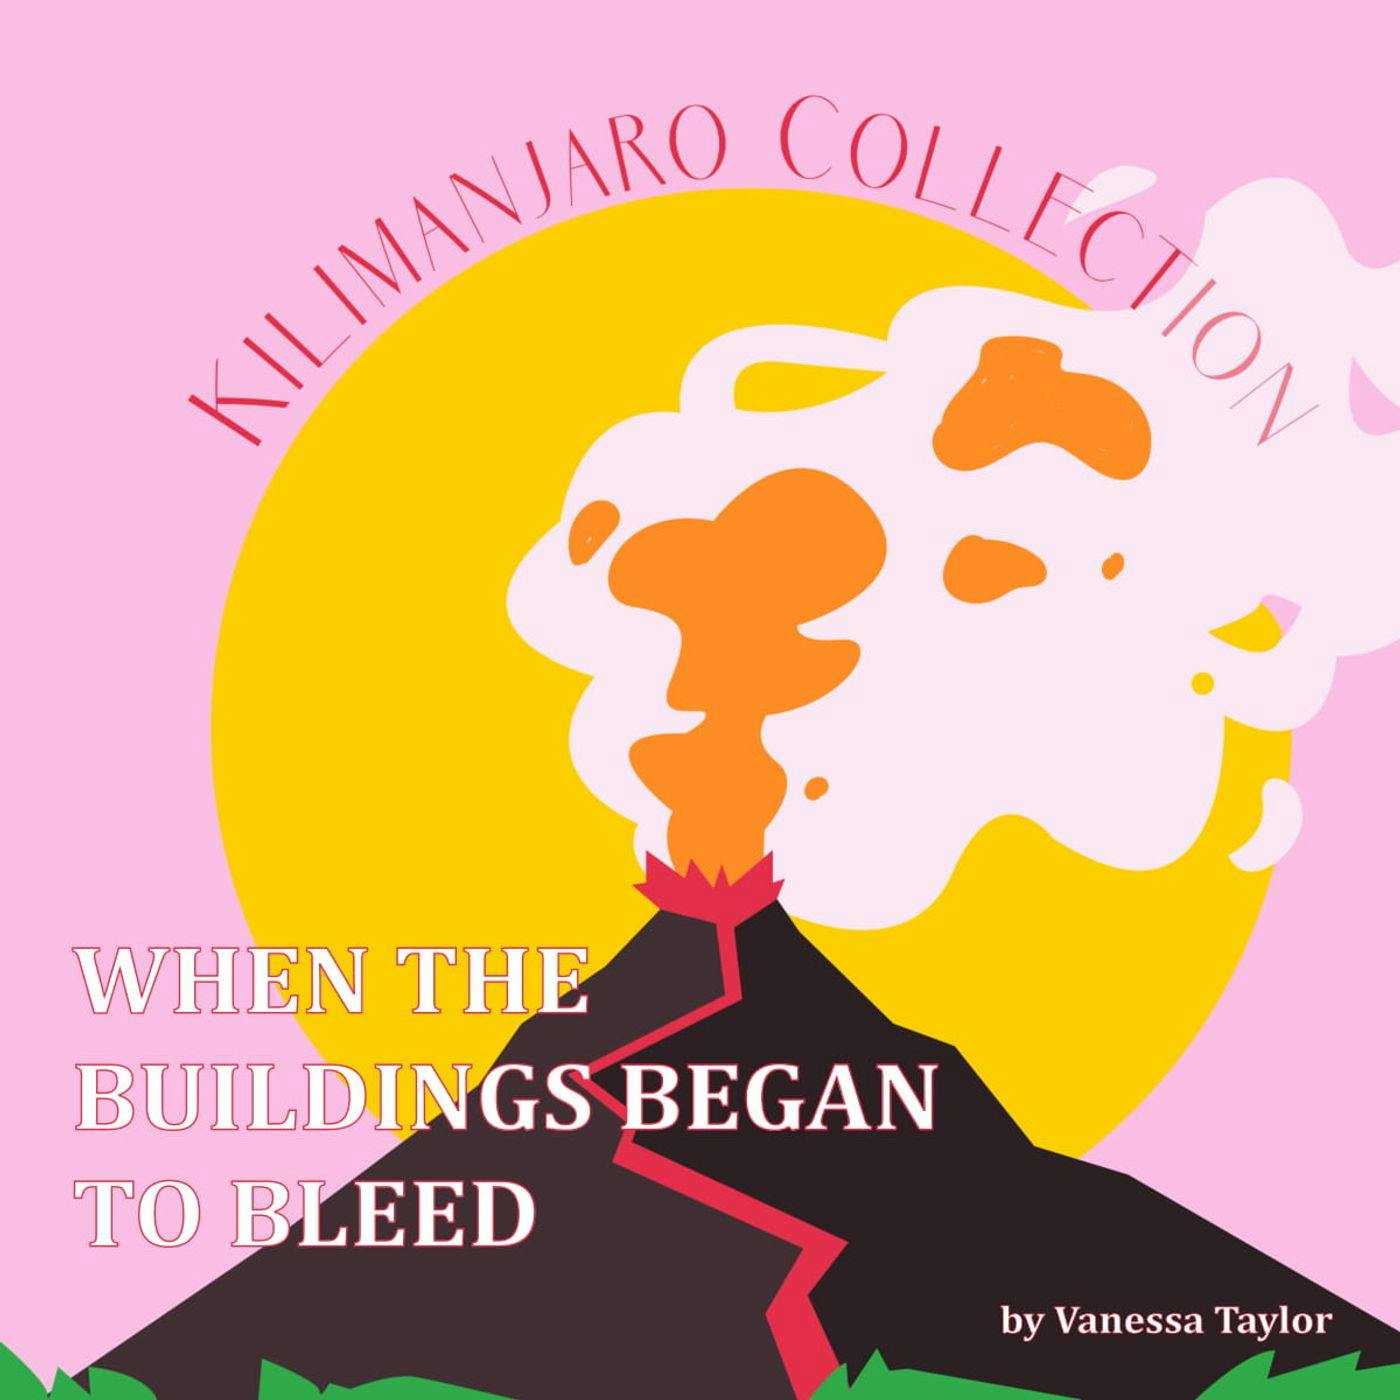 Kilamanjaro Collection: "When The Buildings Began To Bleed" by Vanessa Taylor